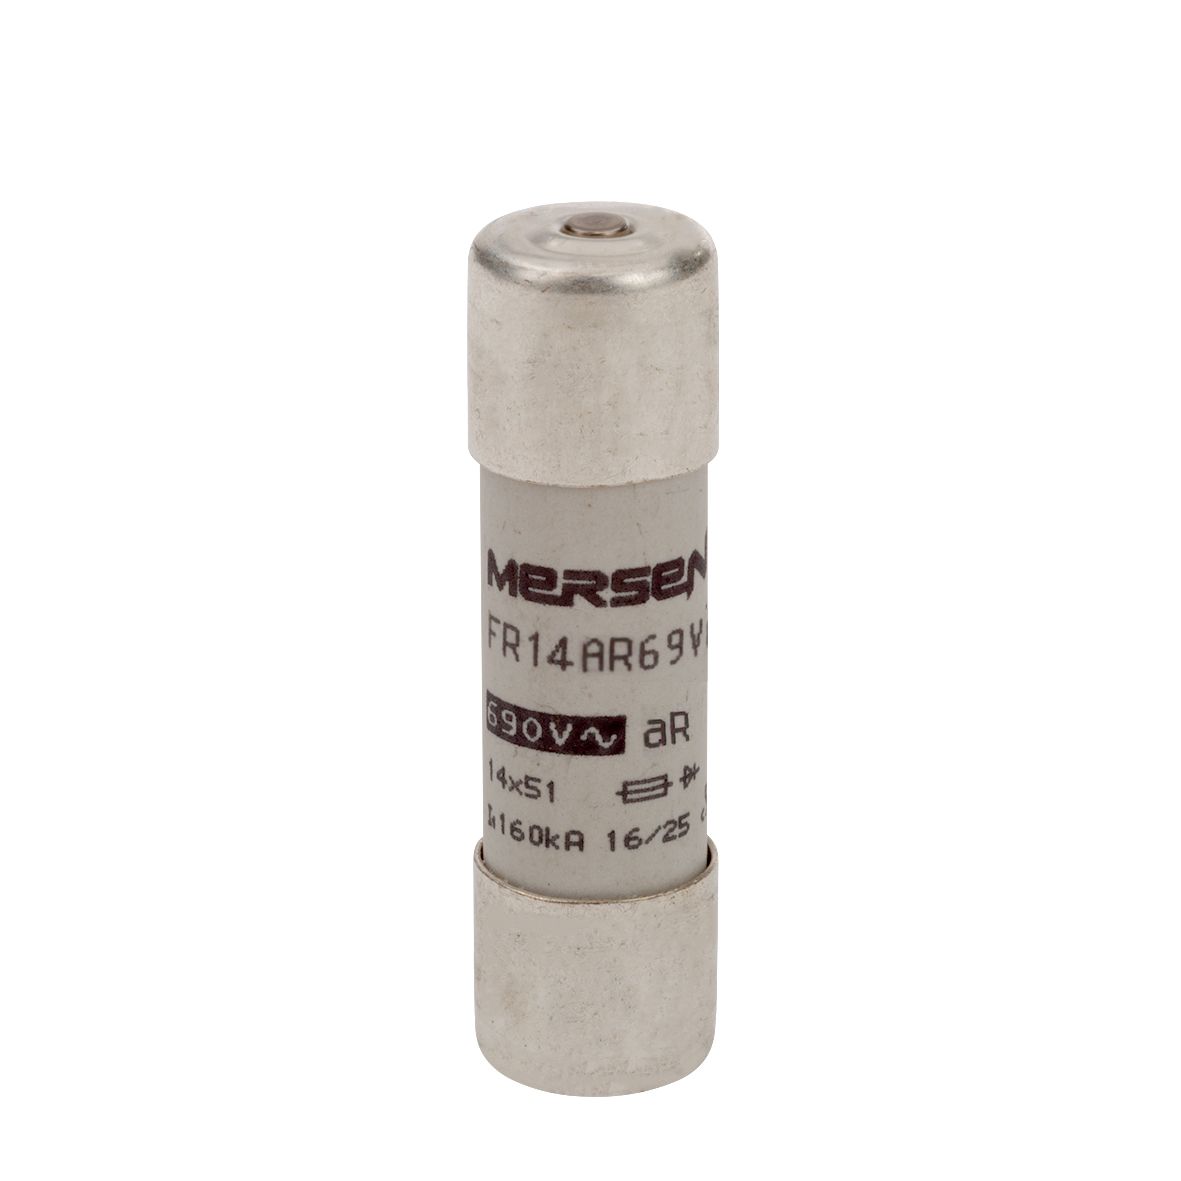 P1056656 - Cylindrical fuse-link aR 690VAC 14x51, 6A, with indicator